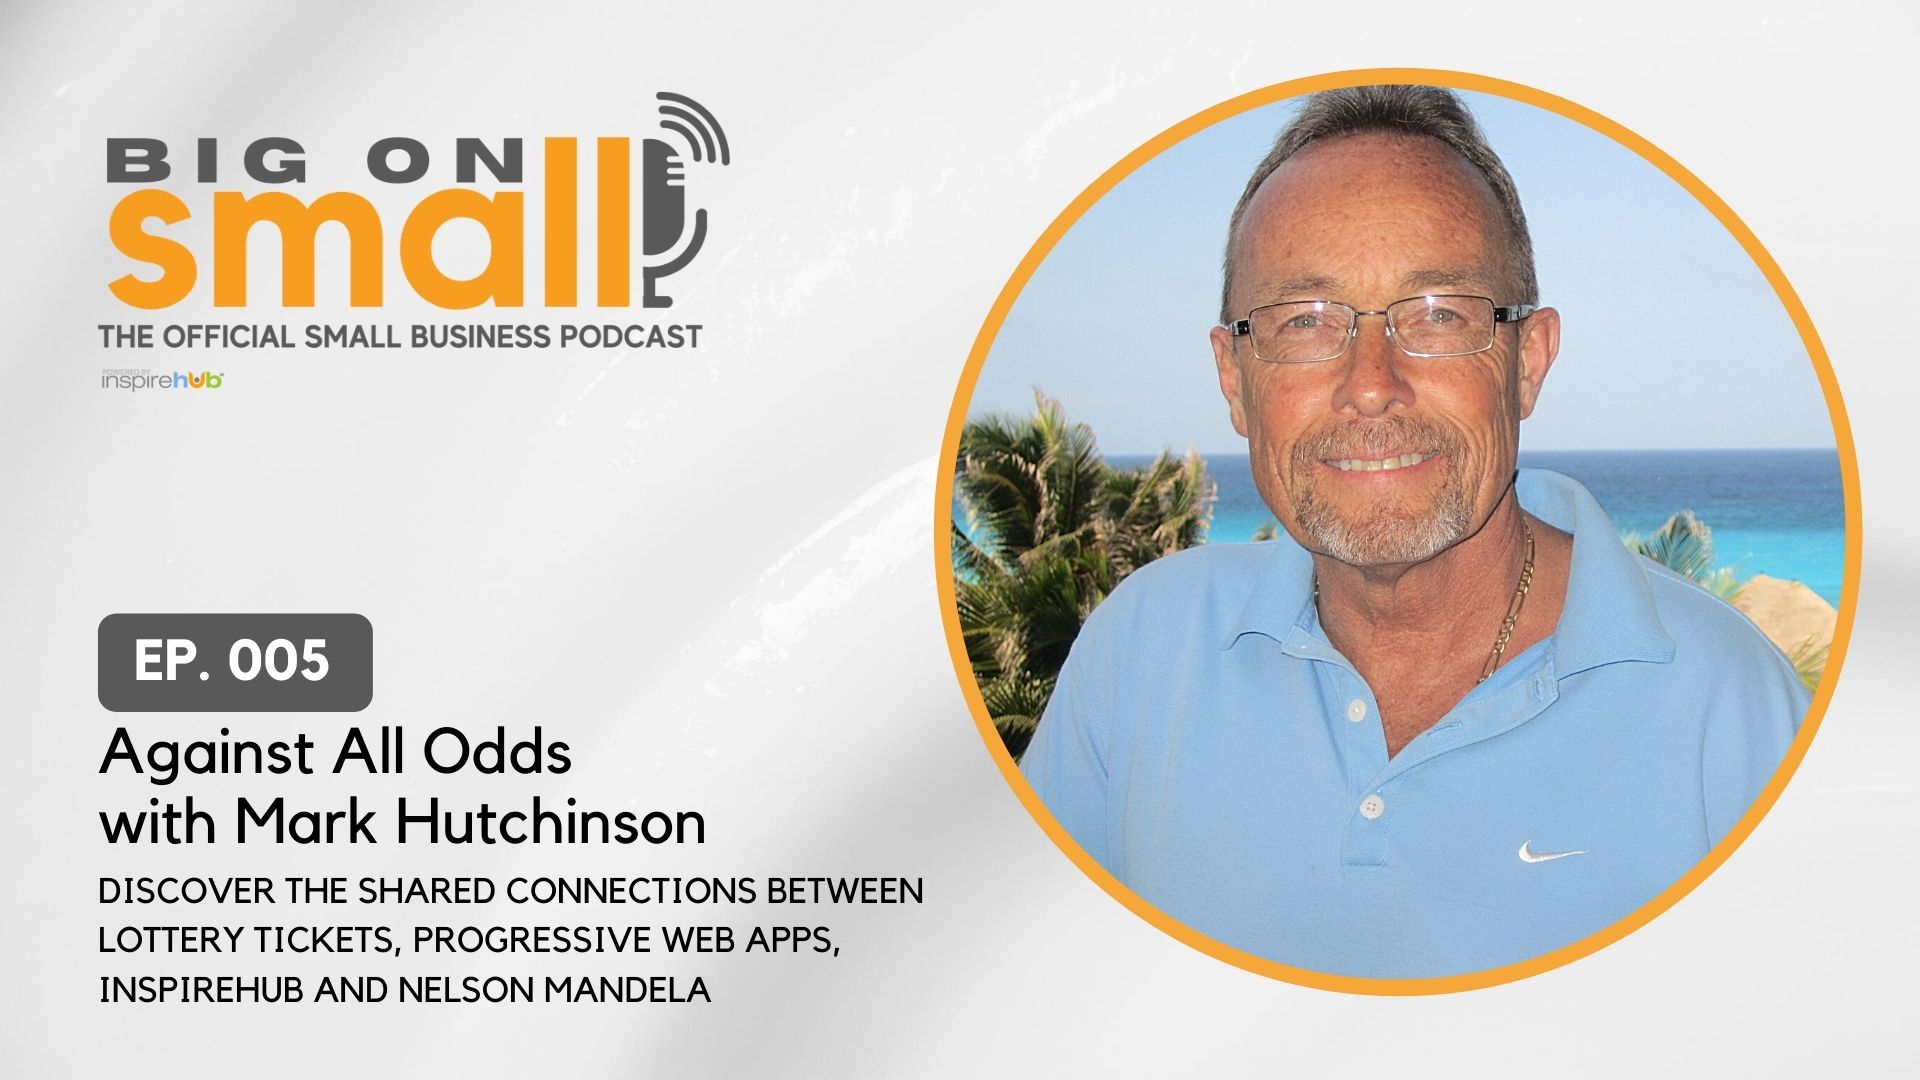 Big on Small Podcast Episode 5: Against All Odds with Mark Hutchinson